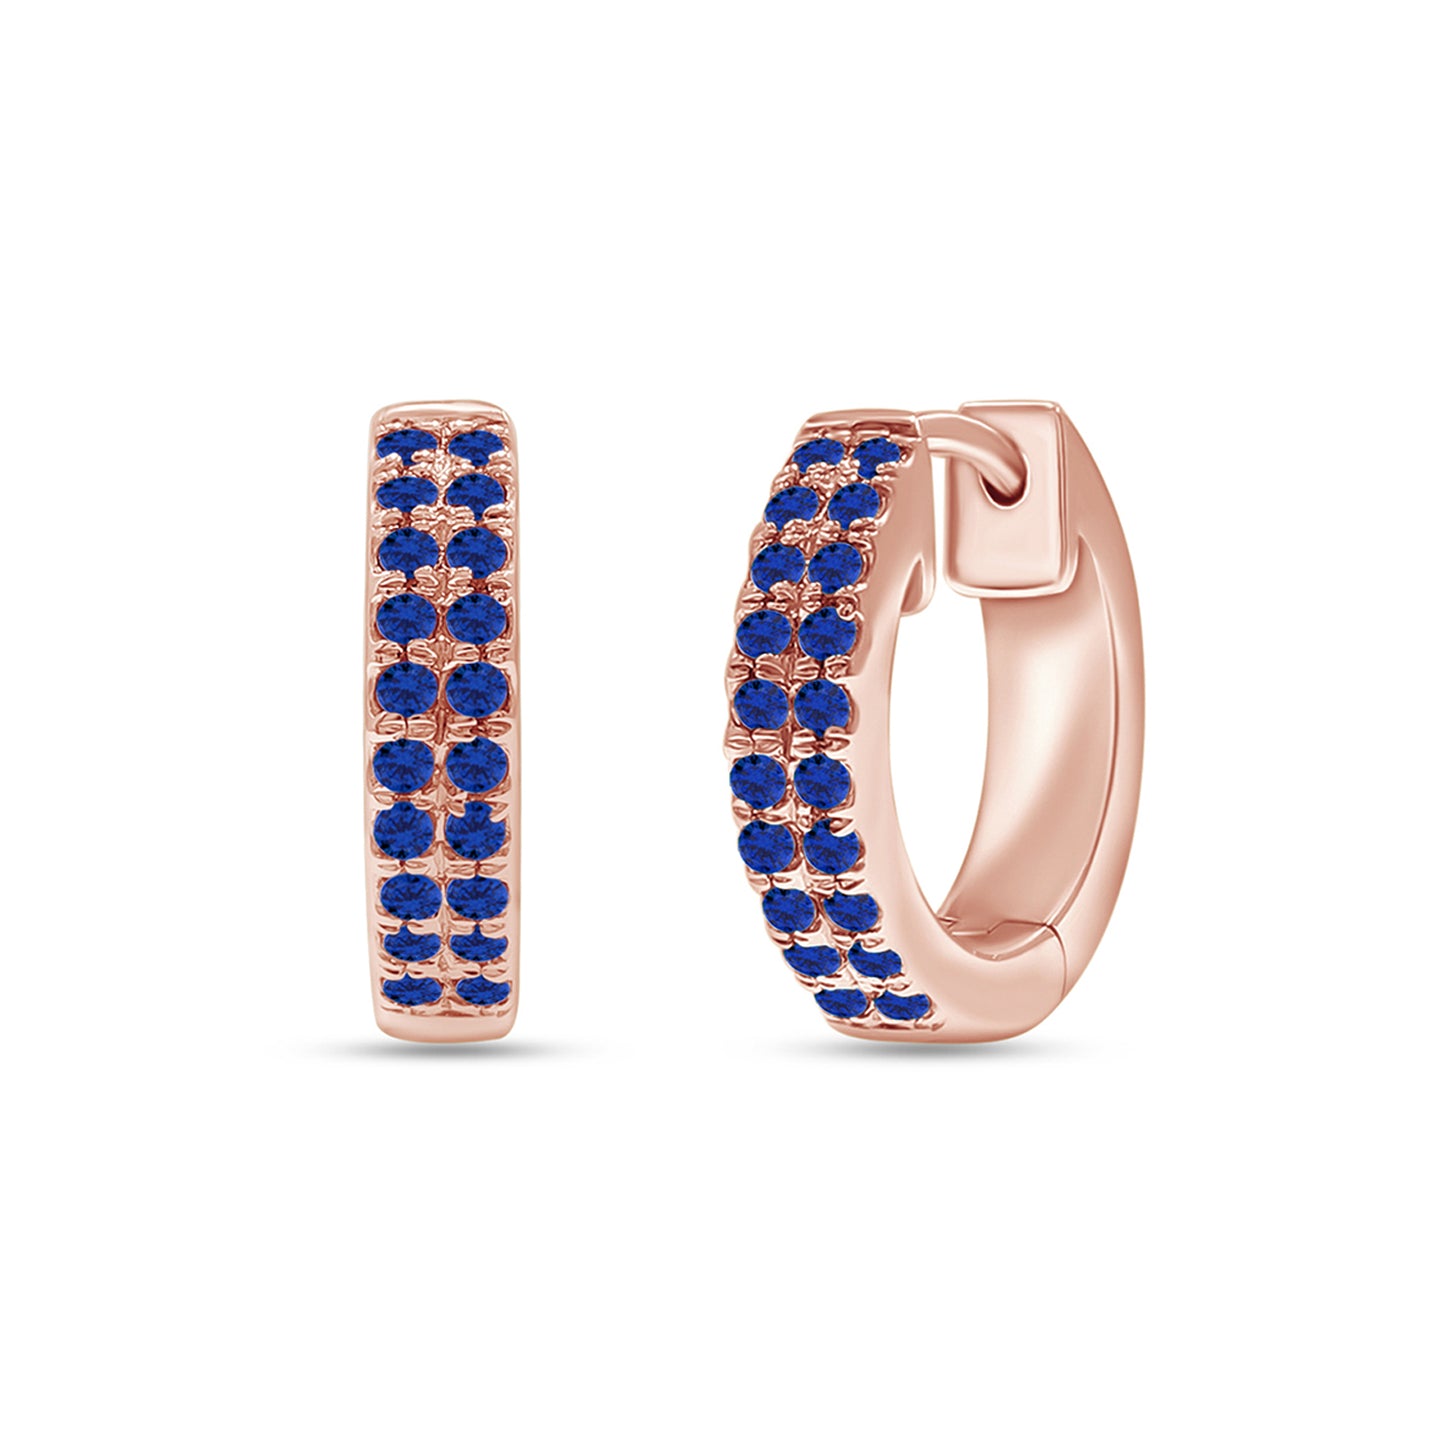 Round Cut Simulated Blue Sapphire Double Row Huggies Hoop Earrings For Women In 10K Or 14K Solid Gold And 925 Sterling Silver